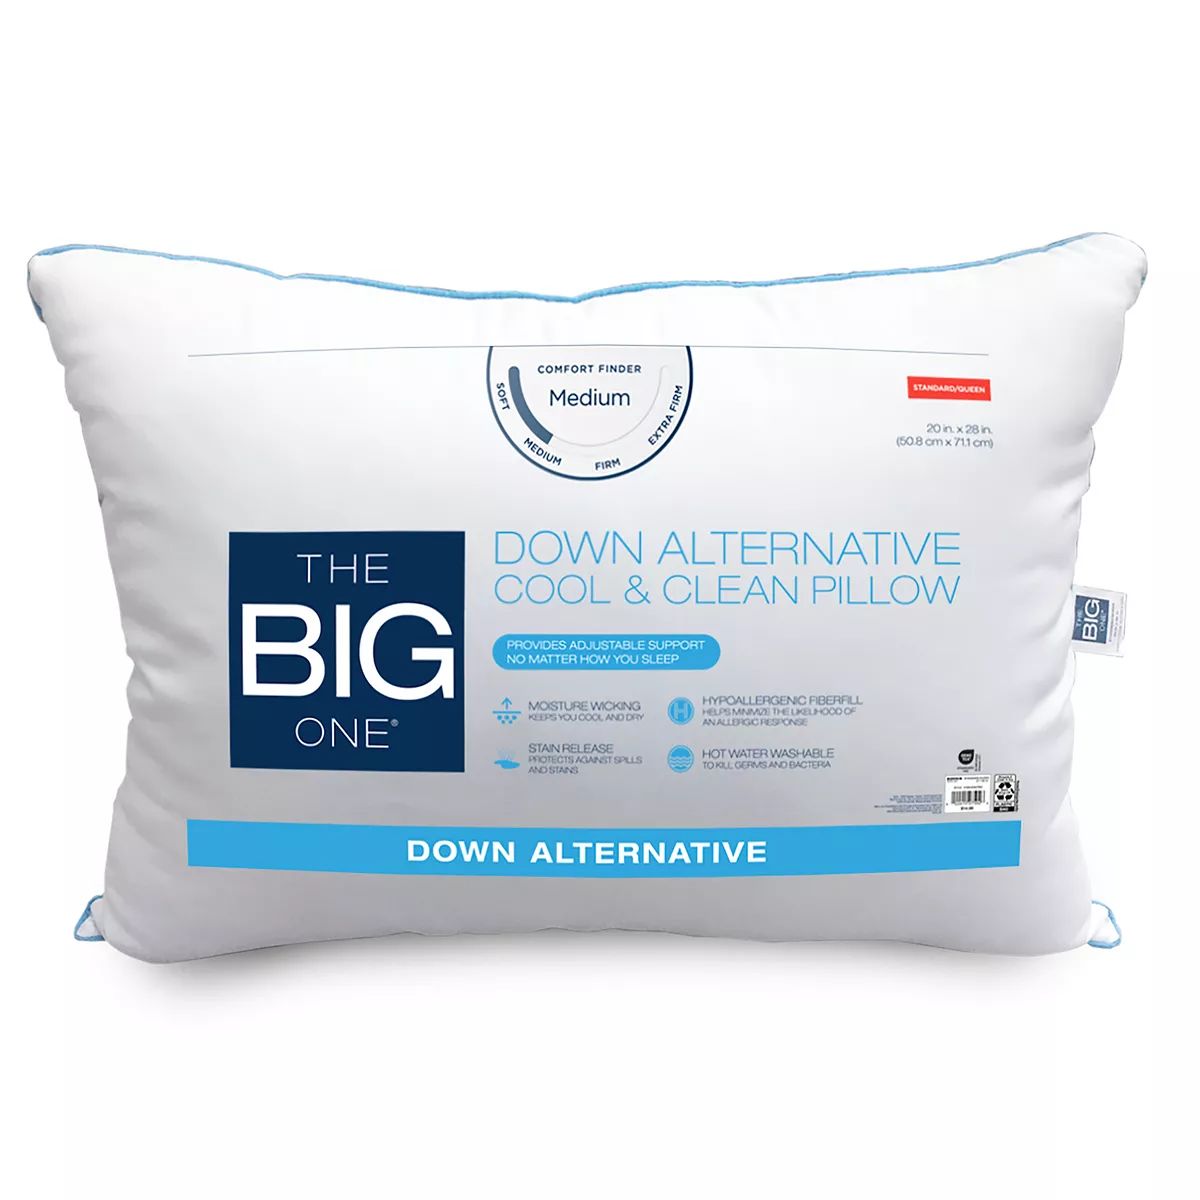 The Big One® Down Alternative Cool & Clean Pillow | Kohl's